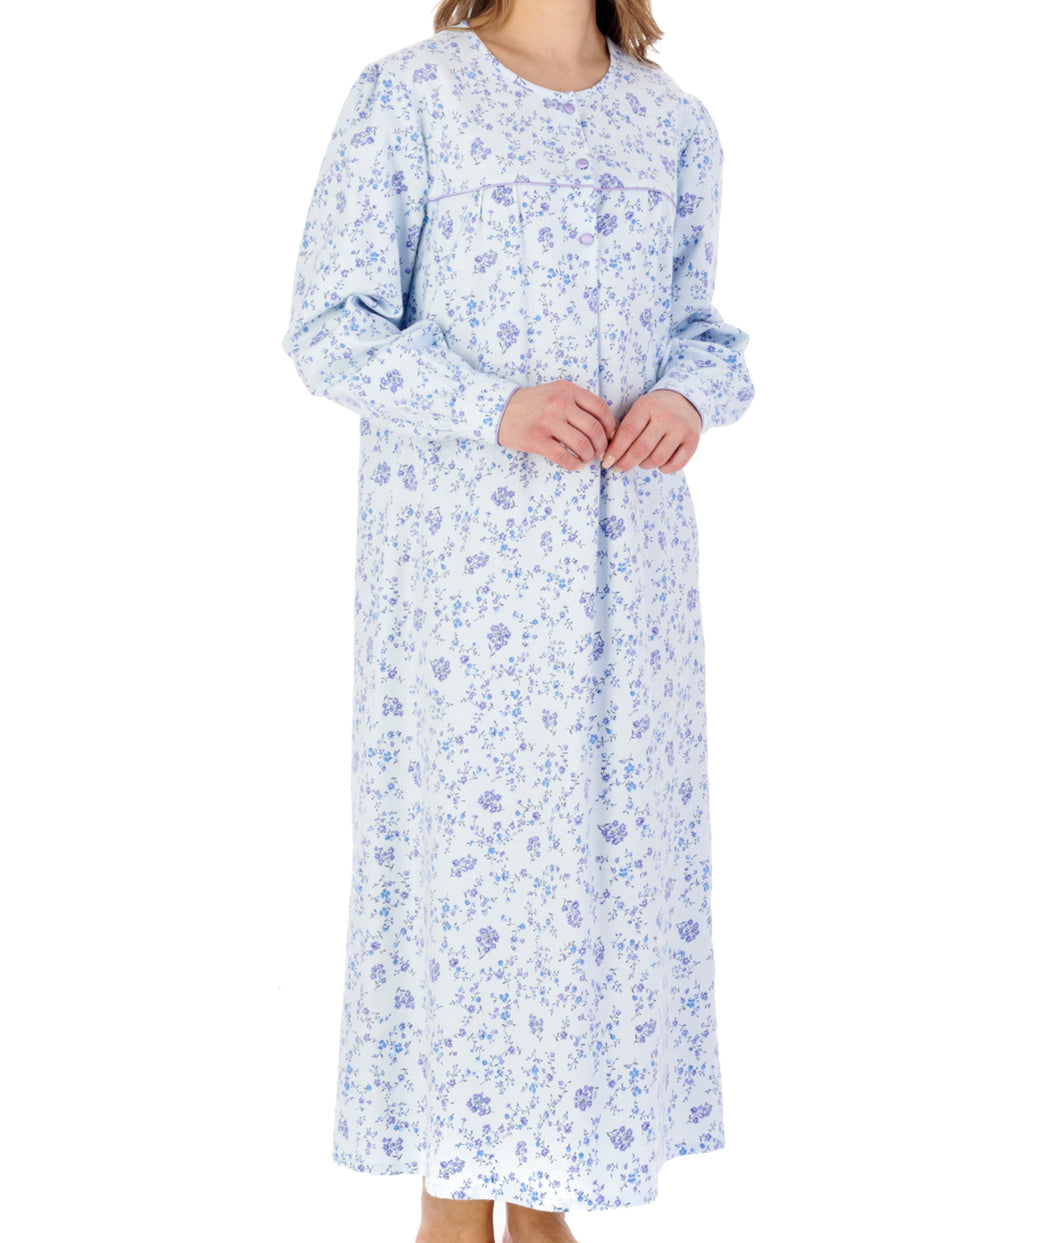 Slenderella Ladies Floral Flannel Cuff Sleeve Long Nightdress (3 Colours)